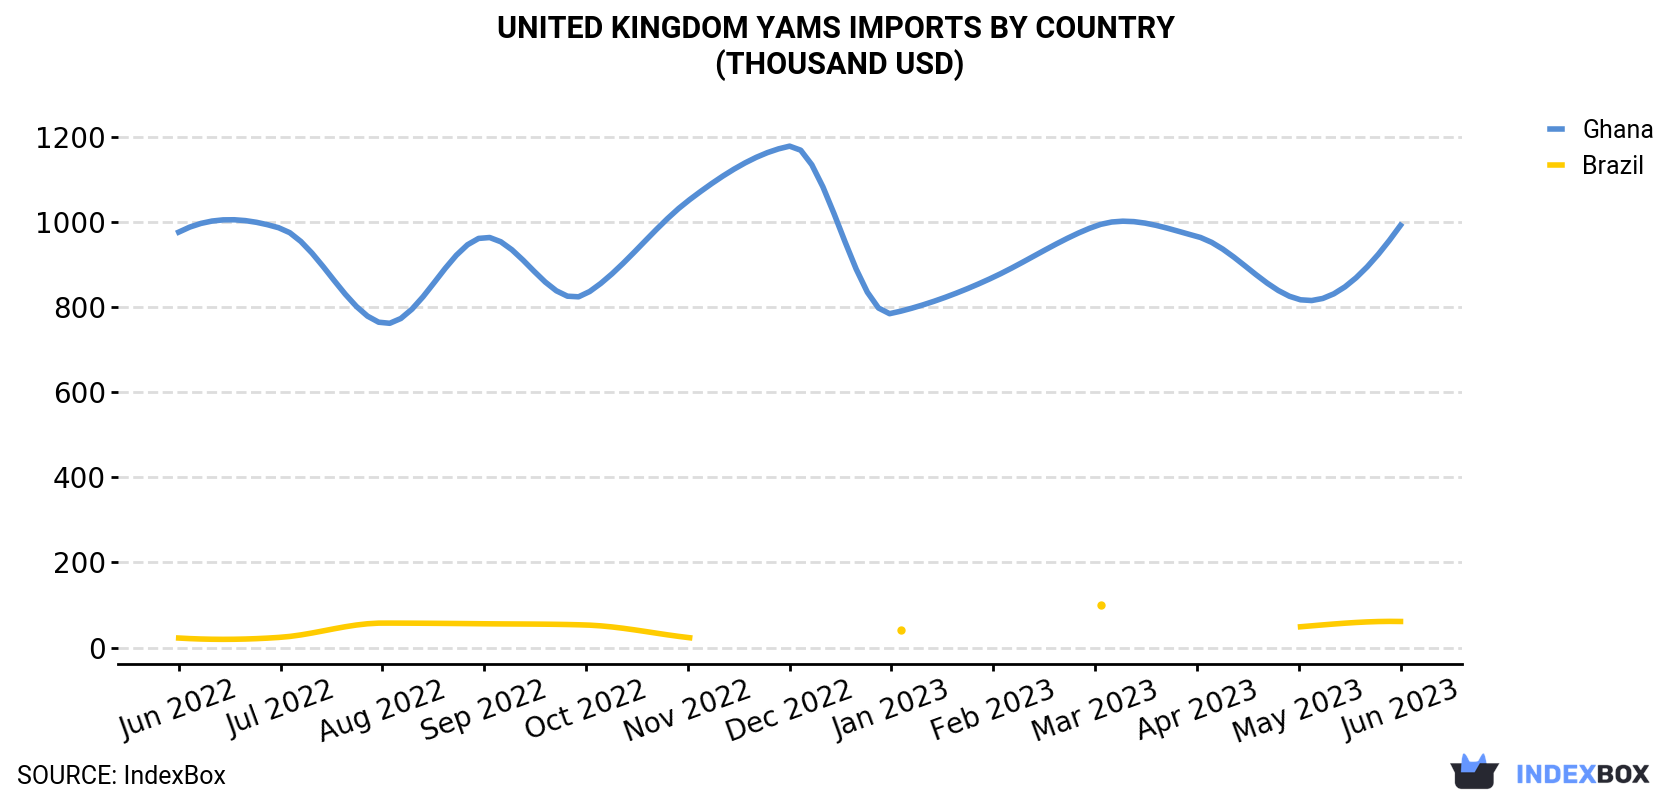 United Kingdom Yams Imports By Country (Thousand USD)